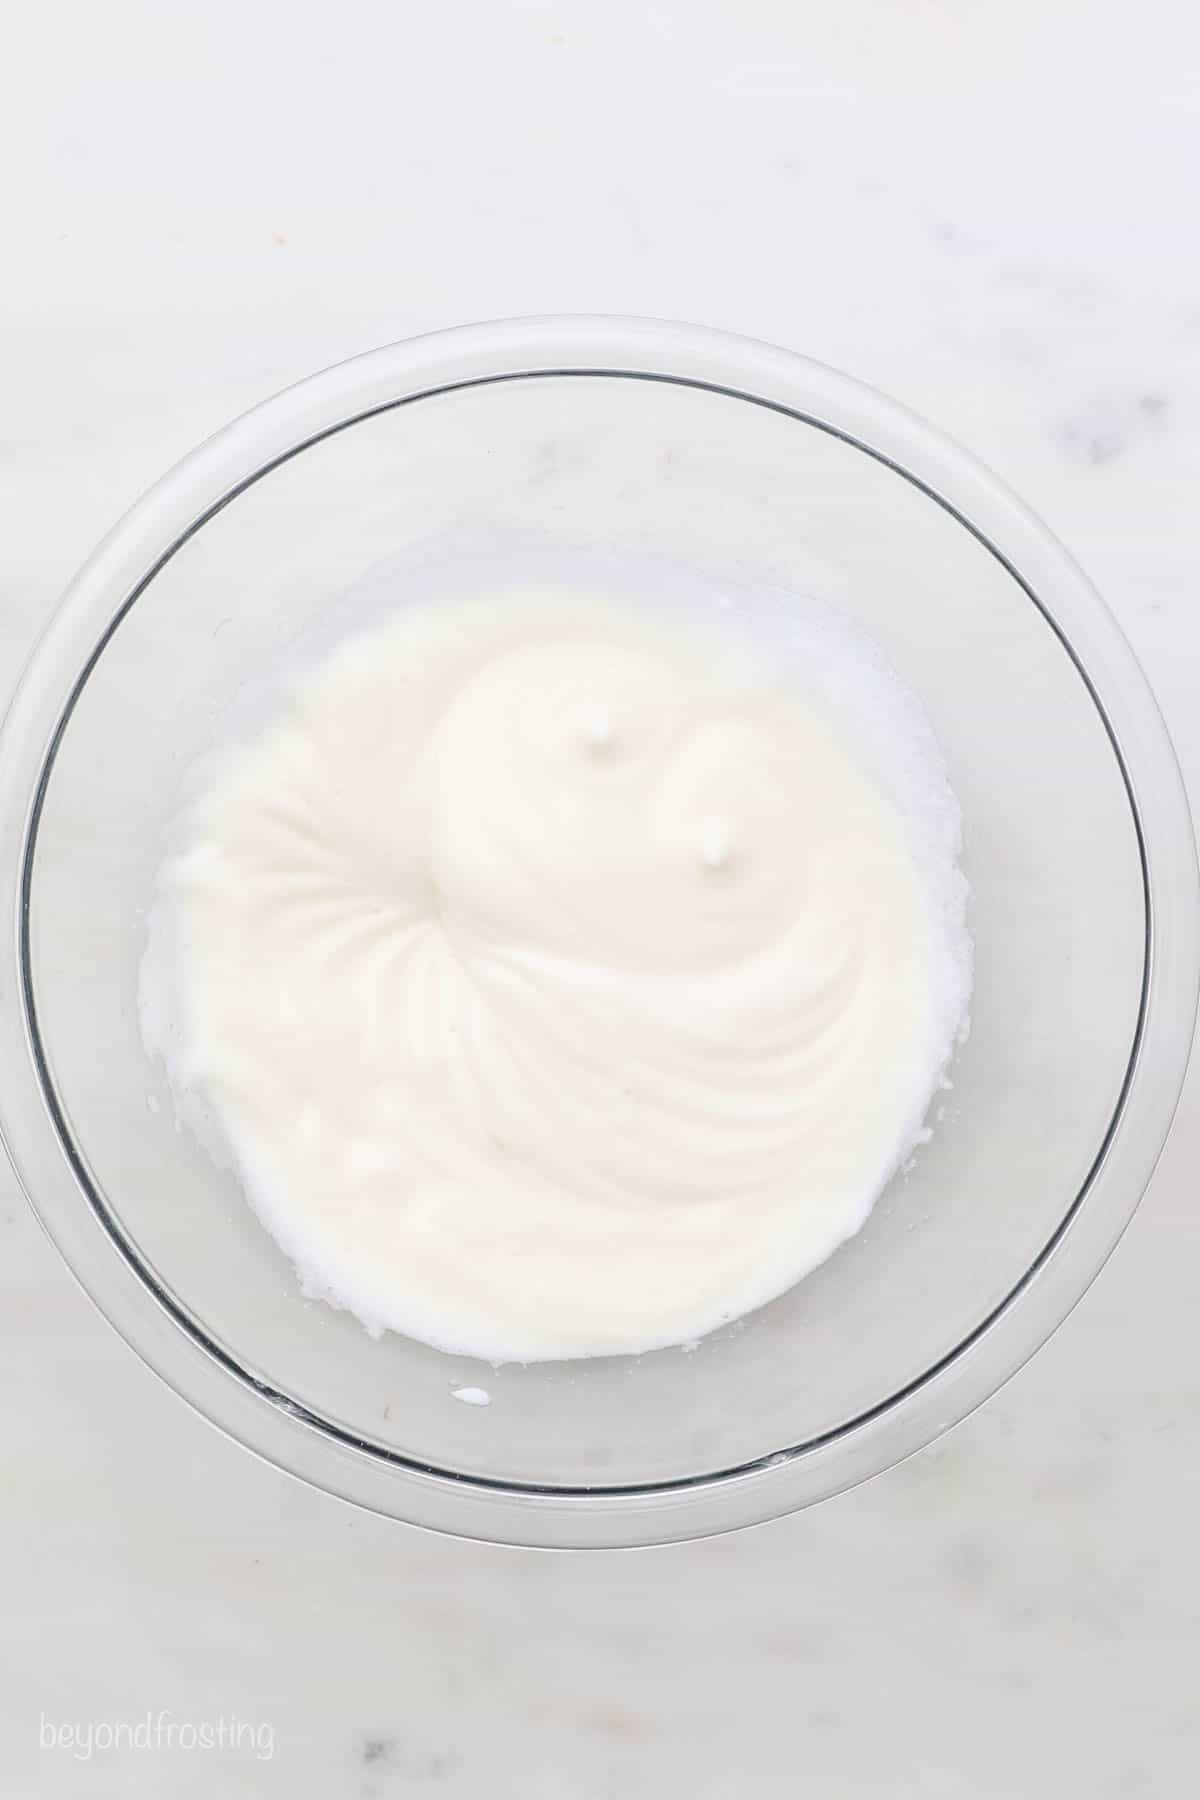 A mixture of egg whites, salt and cream of tartar beaten to soft peaks in a glass bowl